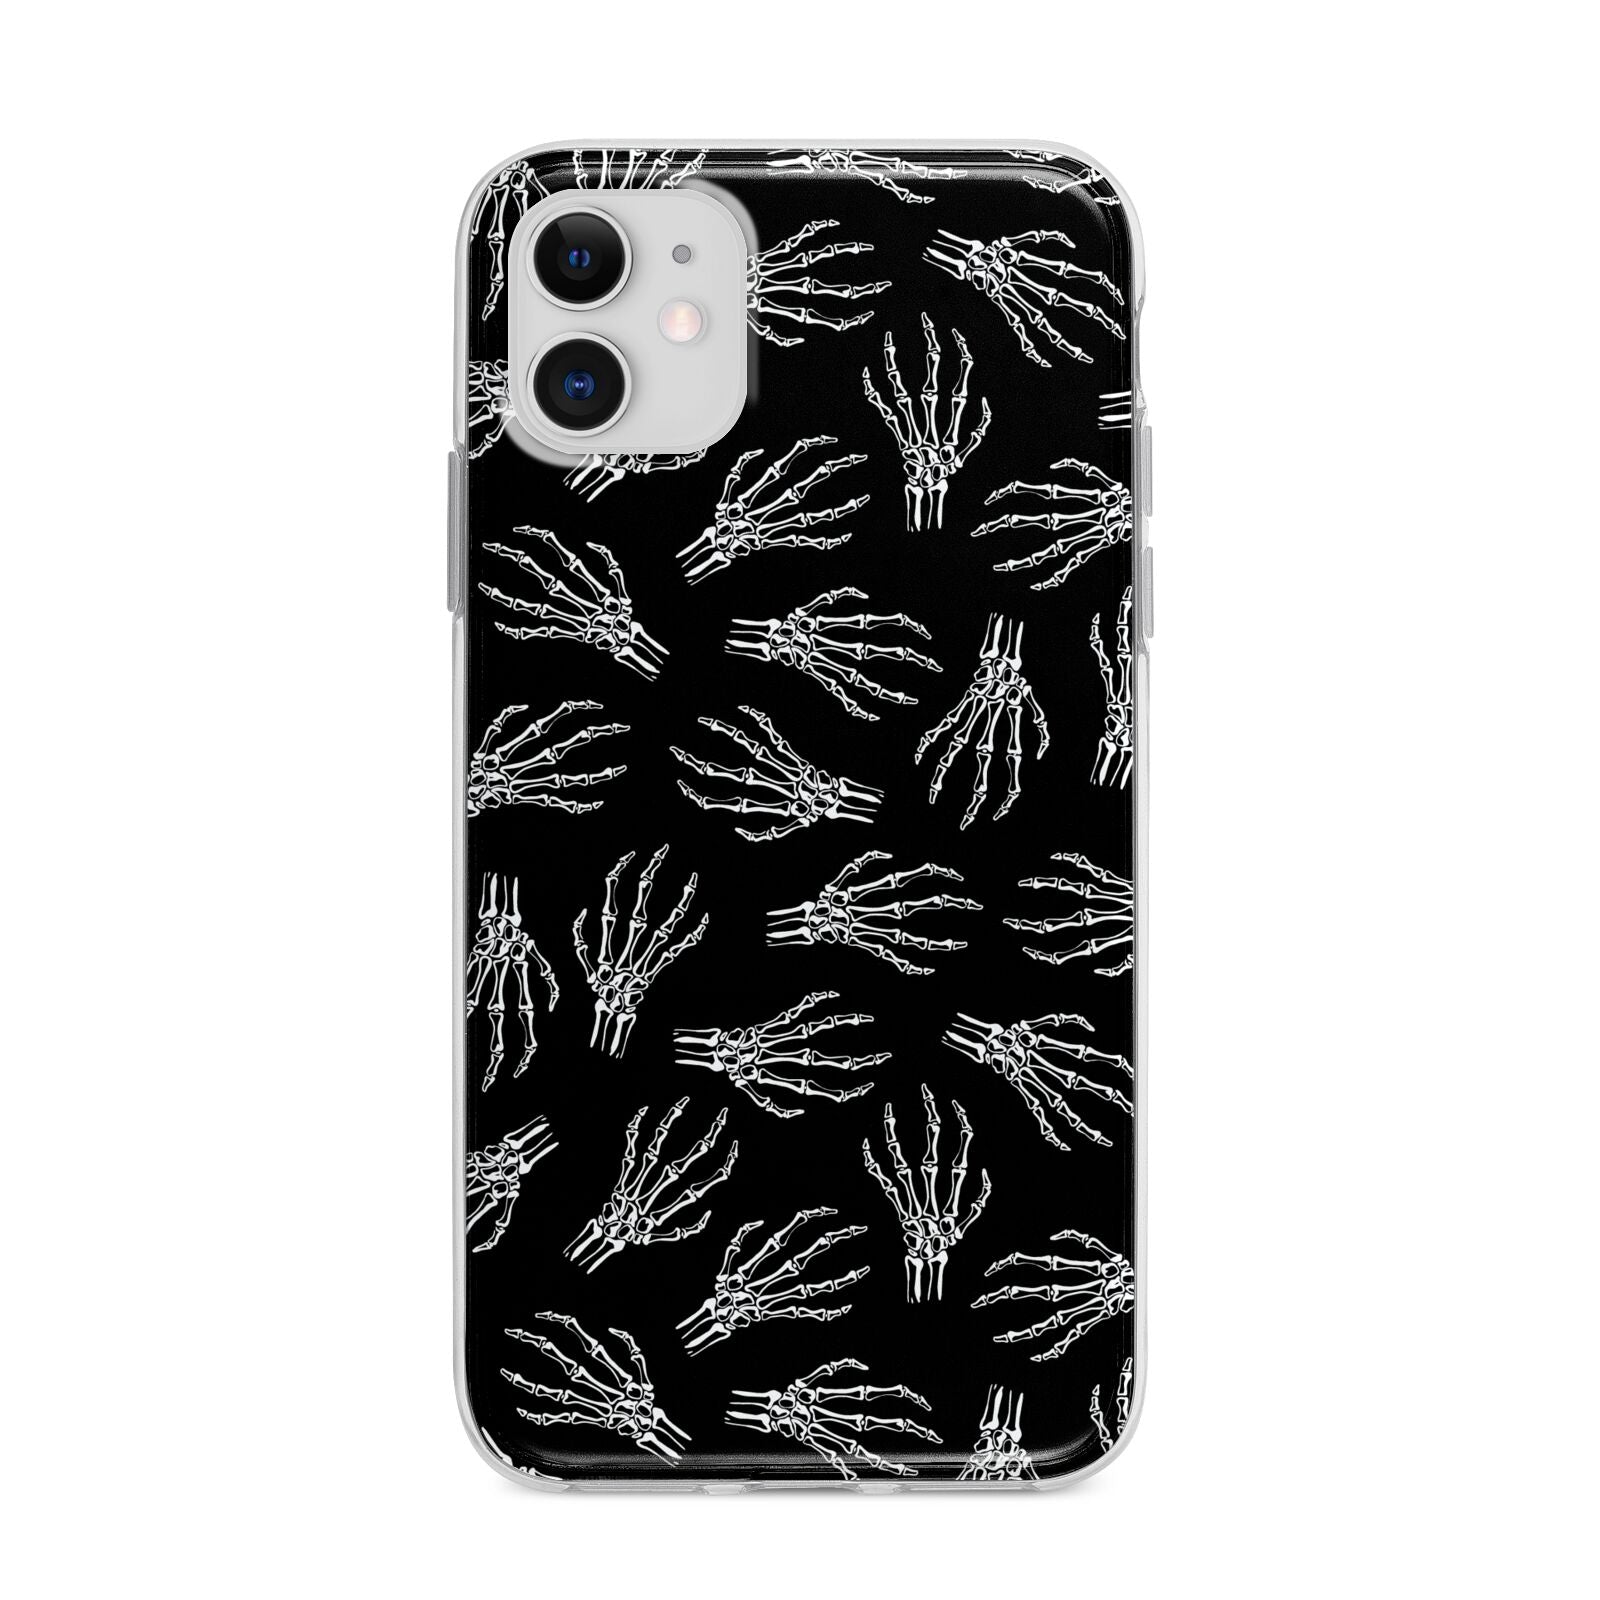 Skeleton Hands Apple iPhone 11 in White with Bumper Case